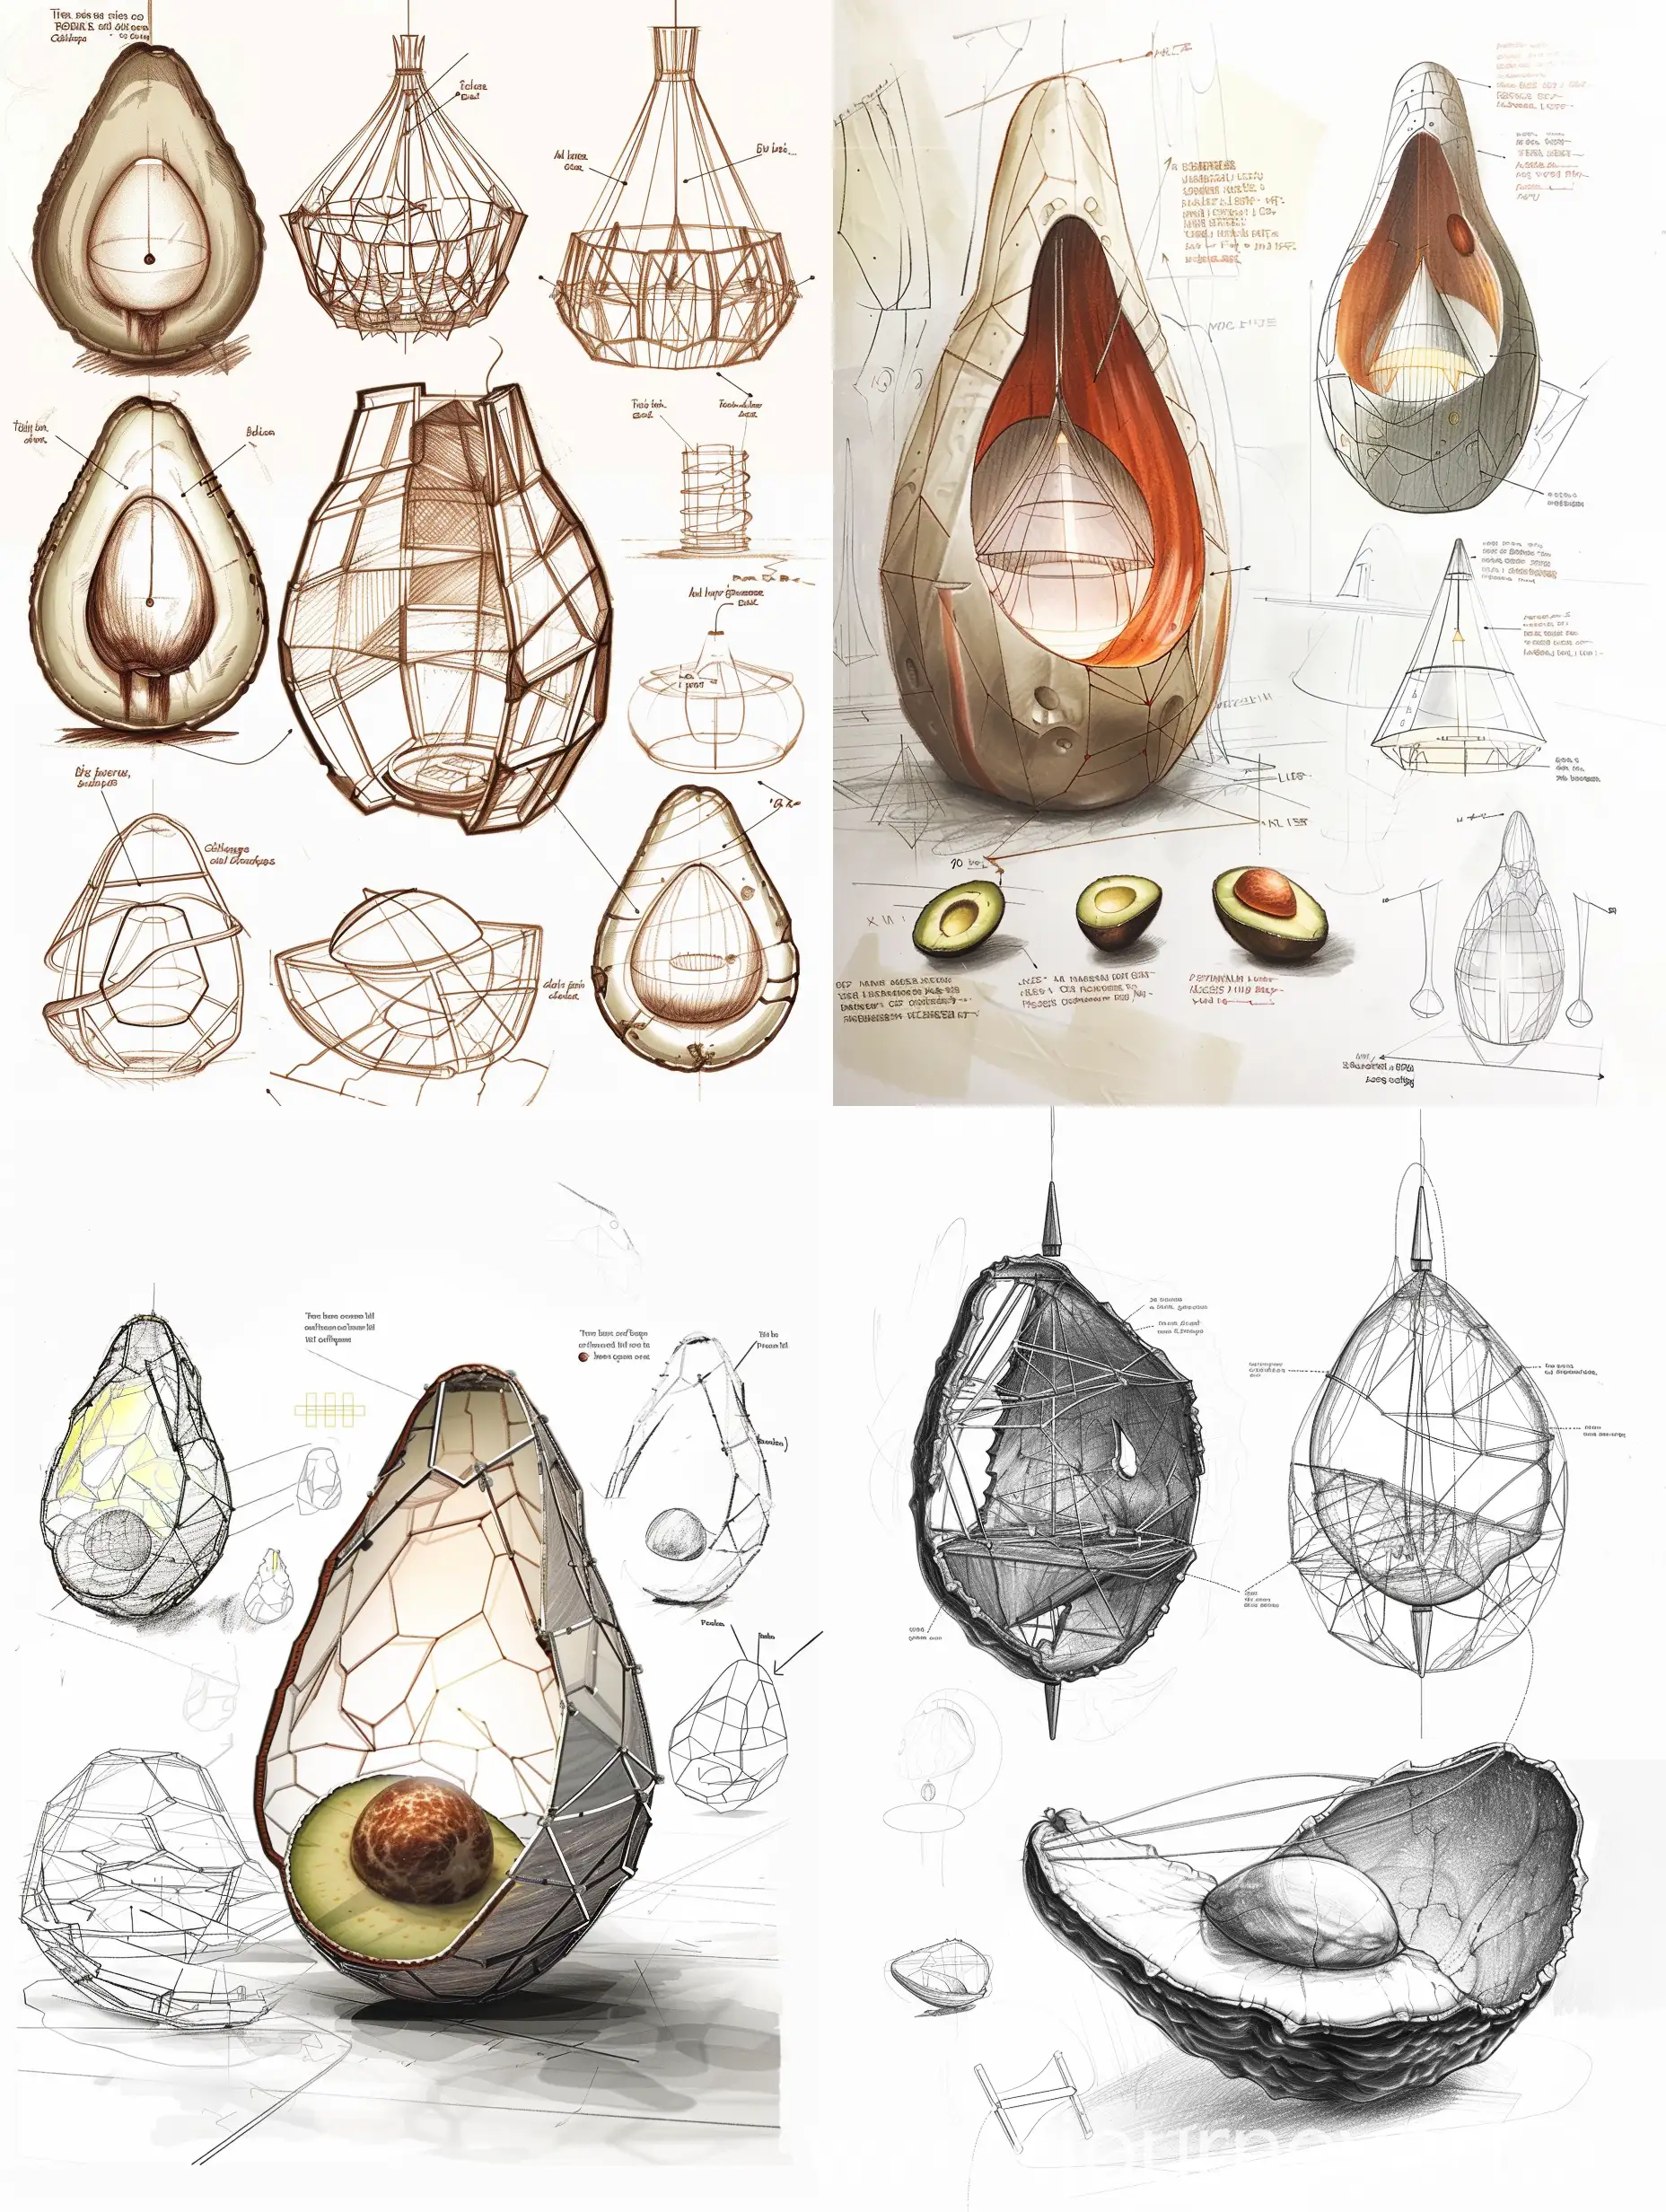 To extract the elements from the avocado, half the pit can be used as a lamp, and the half without the pit can be used as a store,
Bionic morphological evolution
Process, content: form source, form change, deliberation, summary process, how to draw lamps (table lamps, chandeliers
(wall lamp), drawing reference, product design sketch, white background, front view, side view, back view, wire frame, do not need text, different angles of the sketch, do not use any color, pencil line manuscript, each scheme needs to present the form source and intention, shape change deliberation process; And the means to reconstruct and evolve the initial body form. The content includes the source of form, the change of form, the elaboration and the generalization process